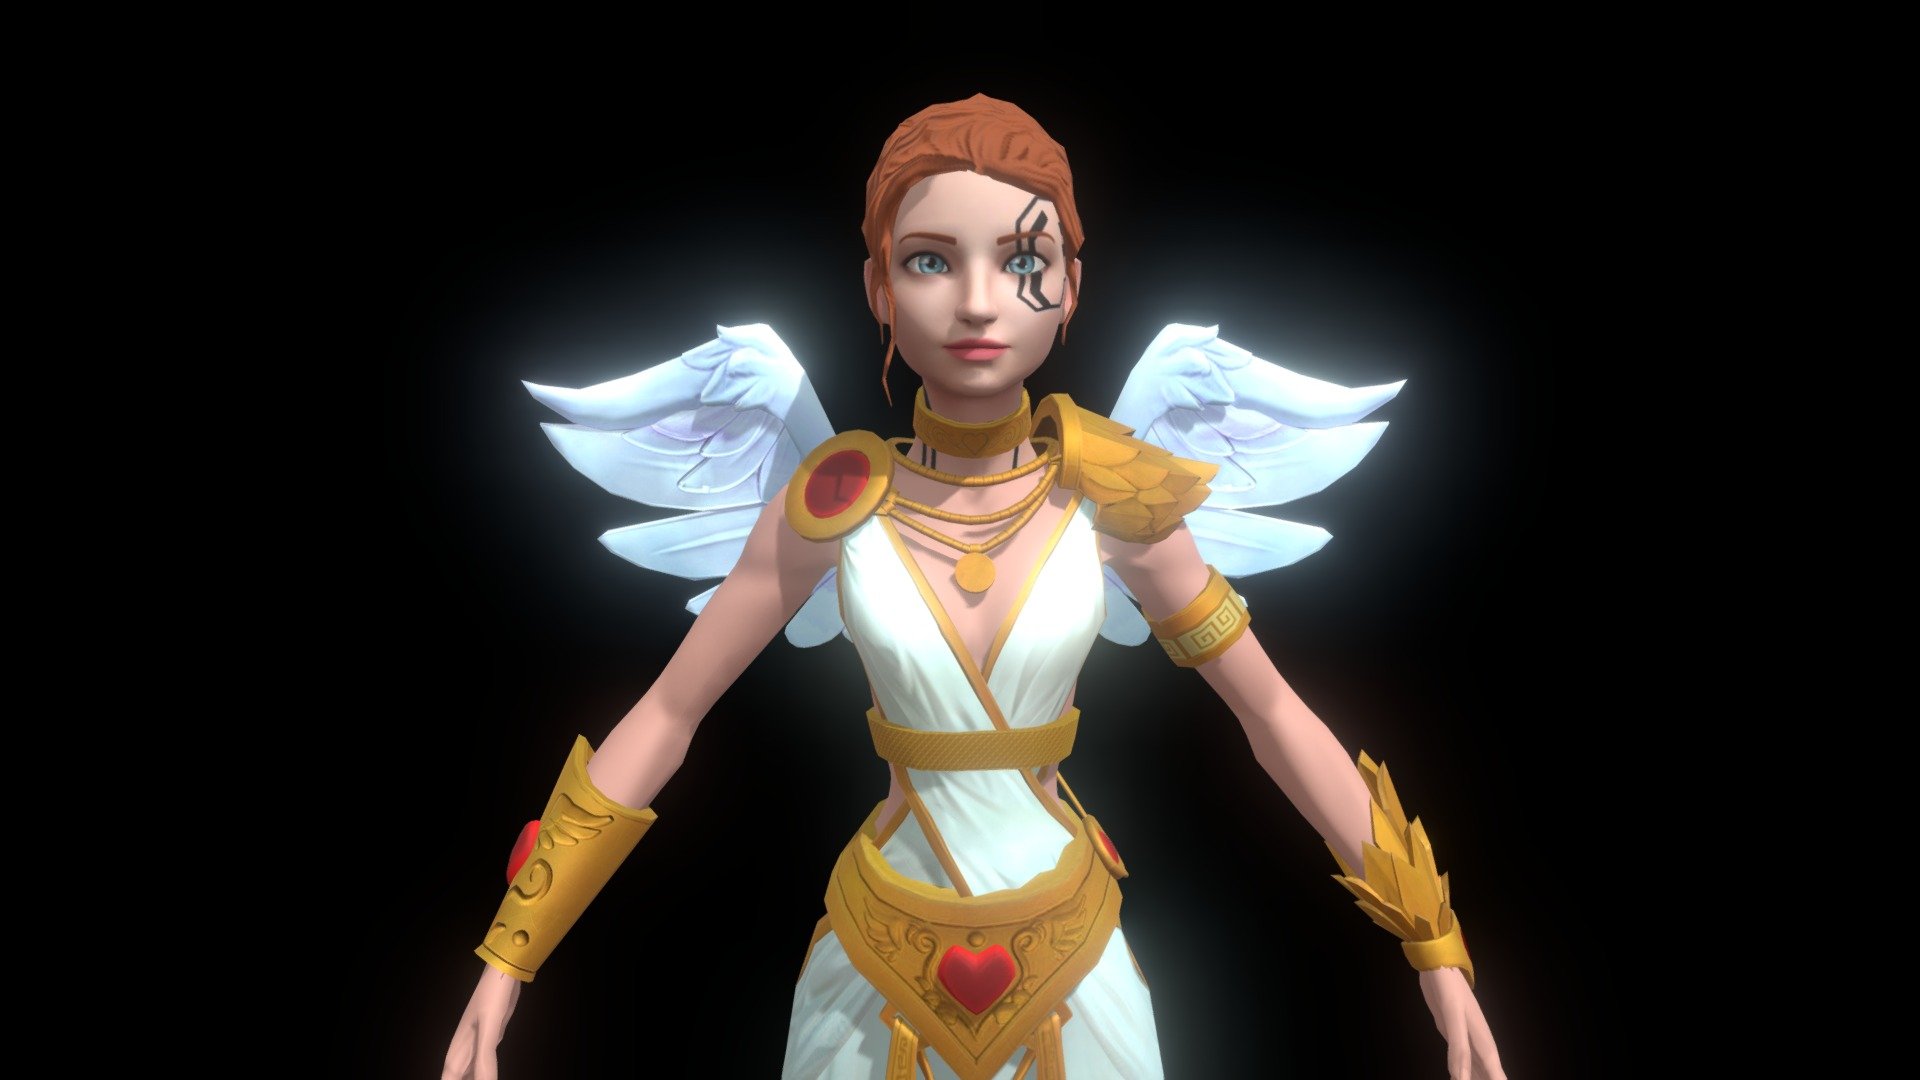 A preview

A mix of princess and Cleopatra with wings

Made by me

Follow my page OpenGameArt: https://4br.me/lPTIQVN9 - Pricess Character Girl For Game Low-Poly - 3D model by Hora Timer (@horatimer) 3d model